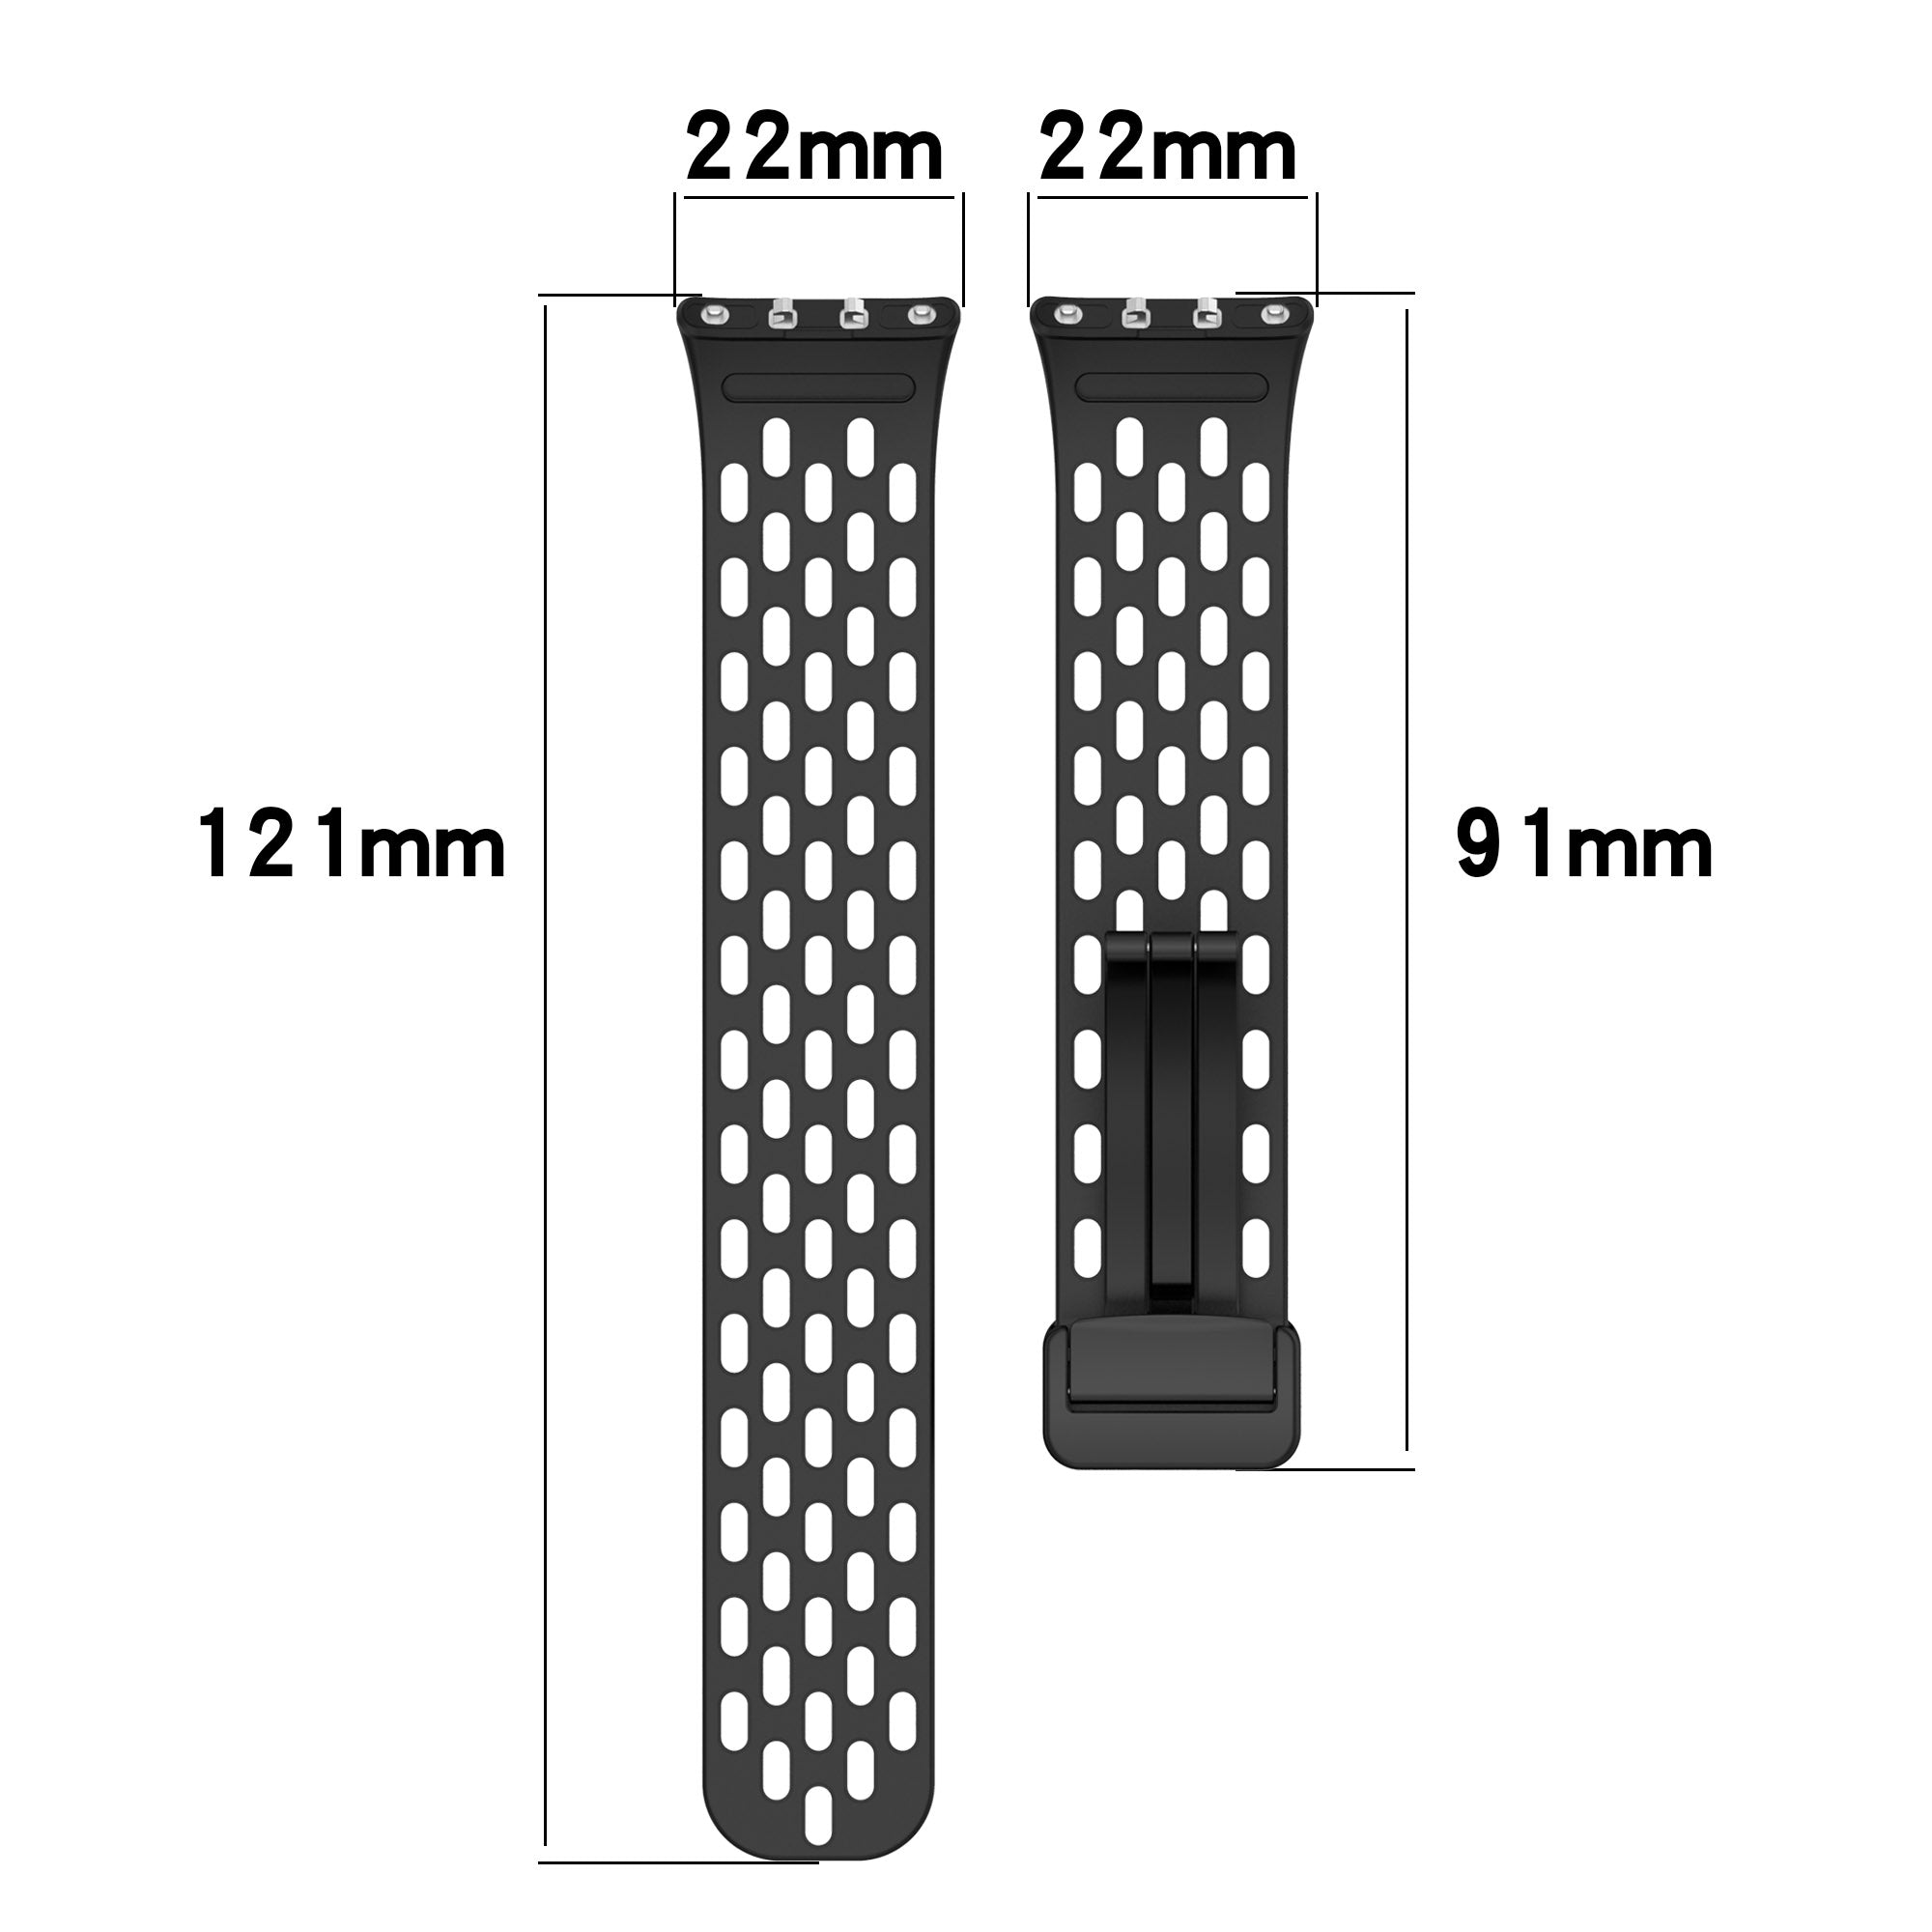 Wrist Band for Samsung Galaxy Fit3 R930 Magnetic Silicone Smartwatch Bracelet Strap - Orange